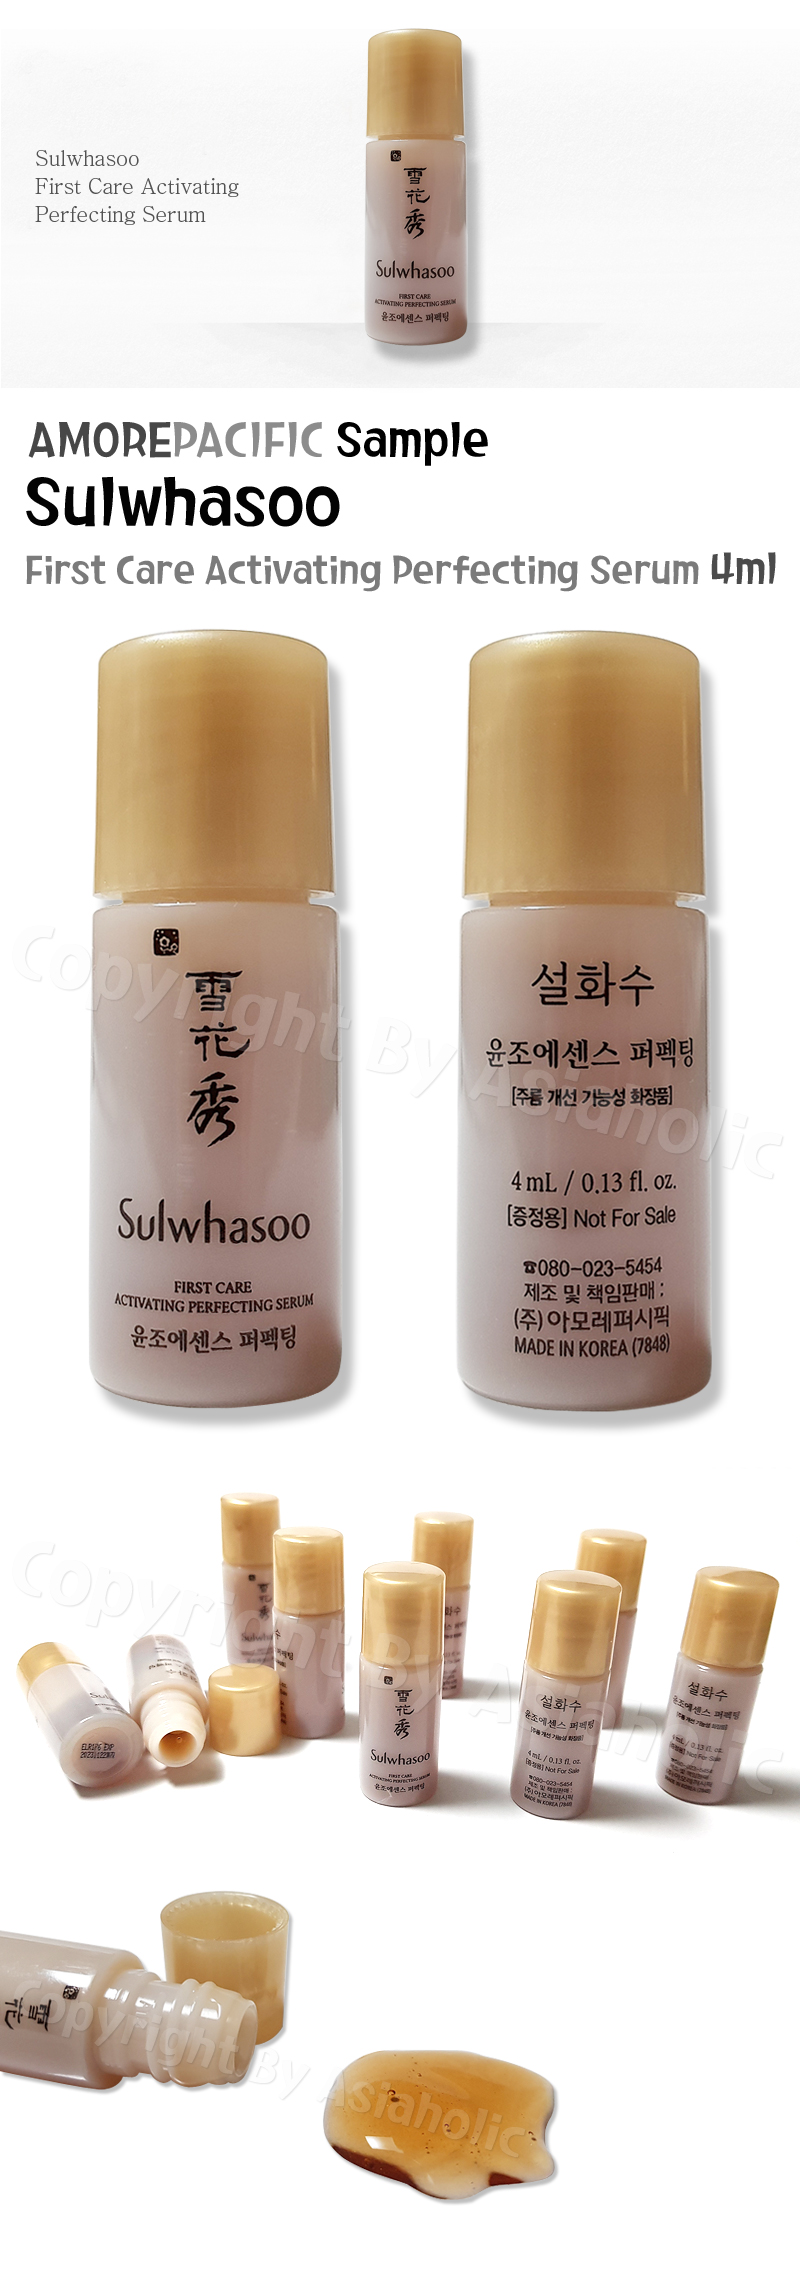 Sulwhasoo First Care Activating Perfecting Serum 4ml x 10pcs (40ml) Sample Newest Version